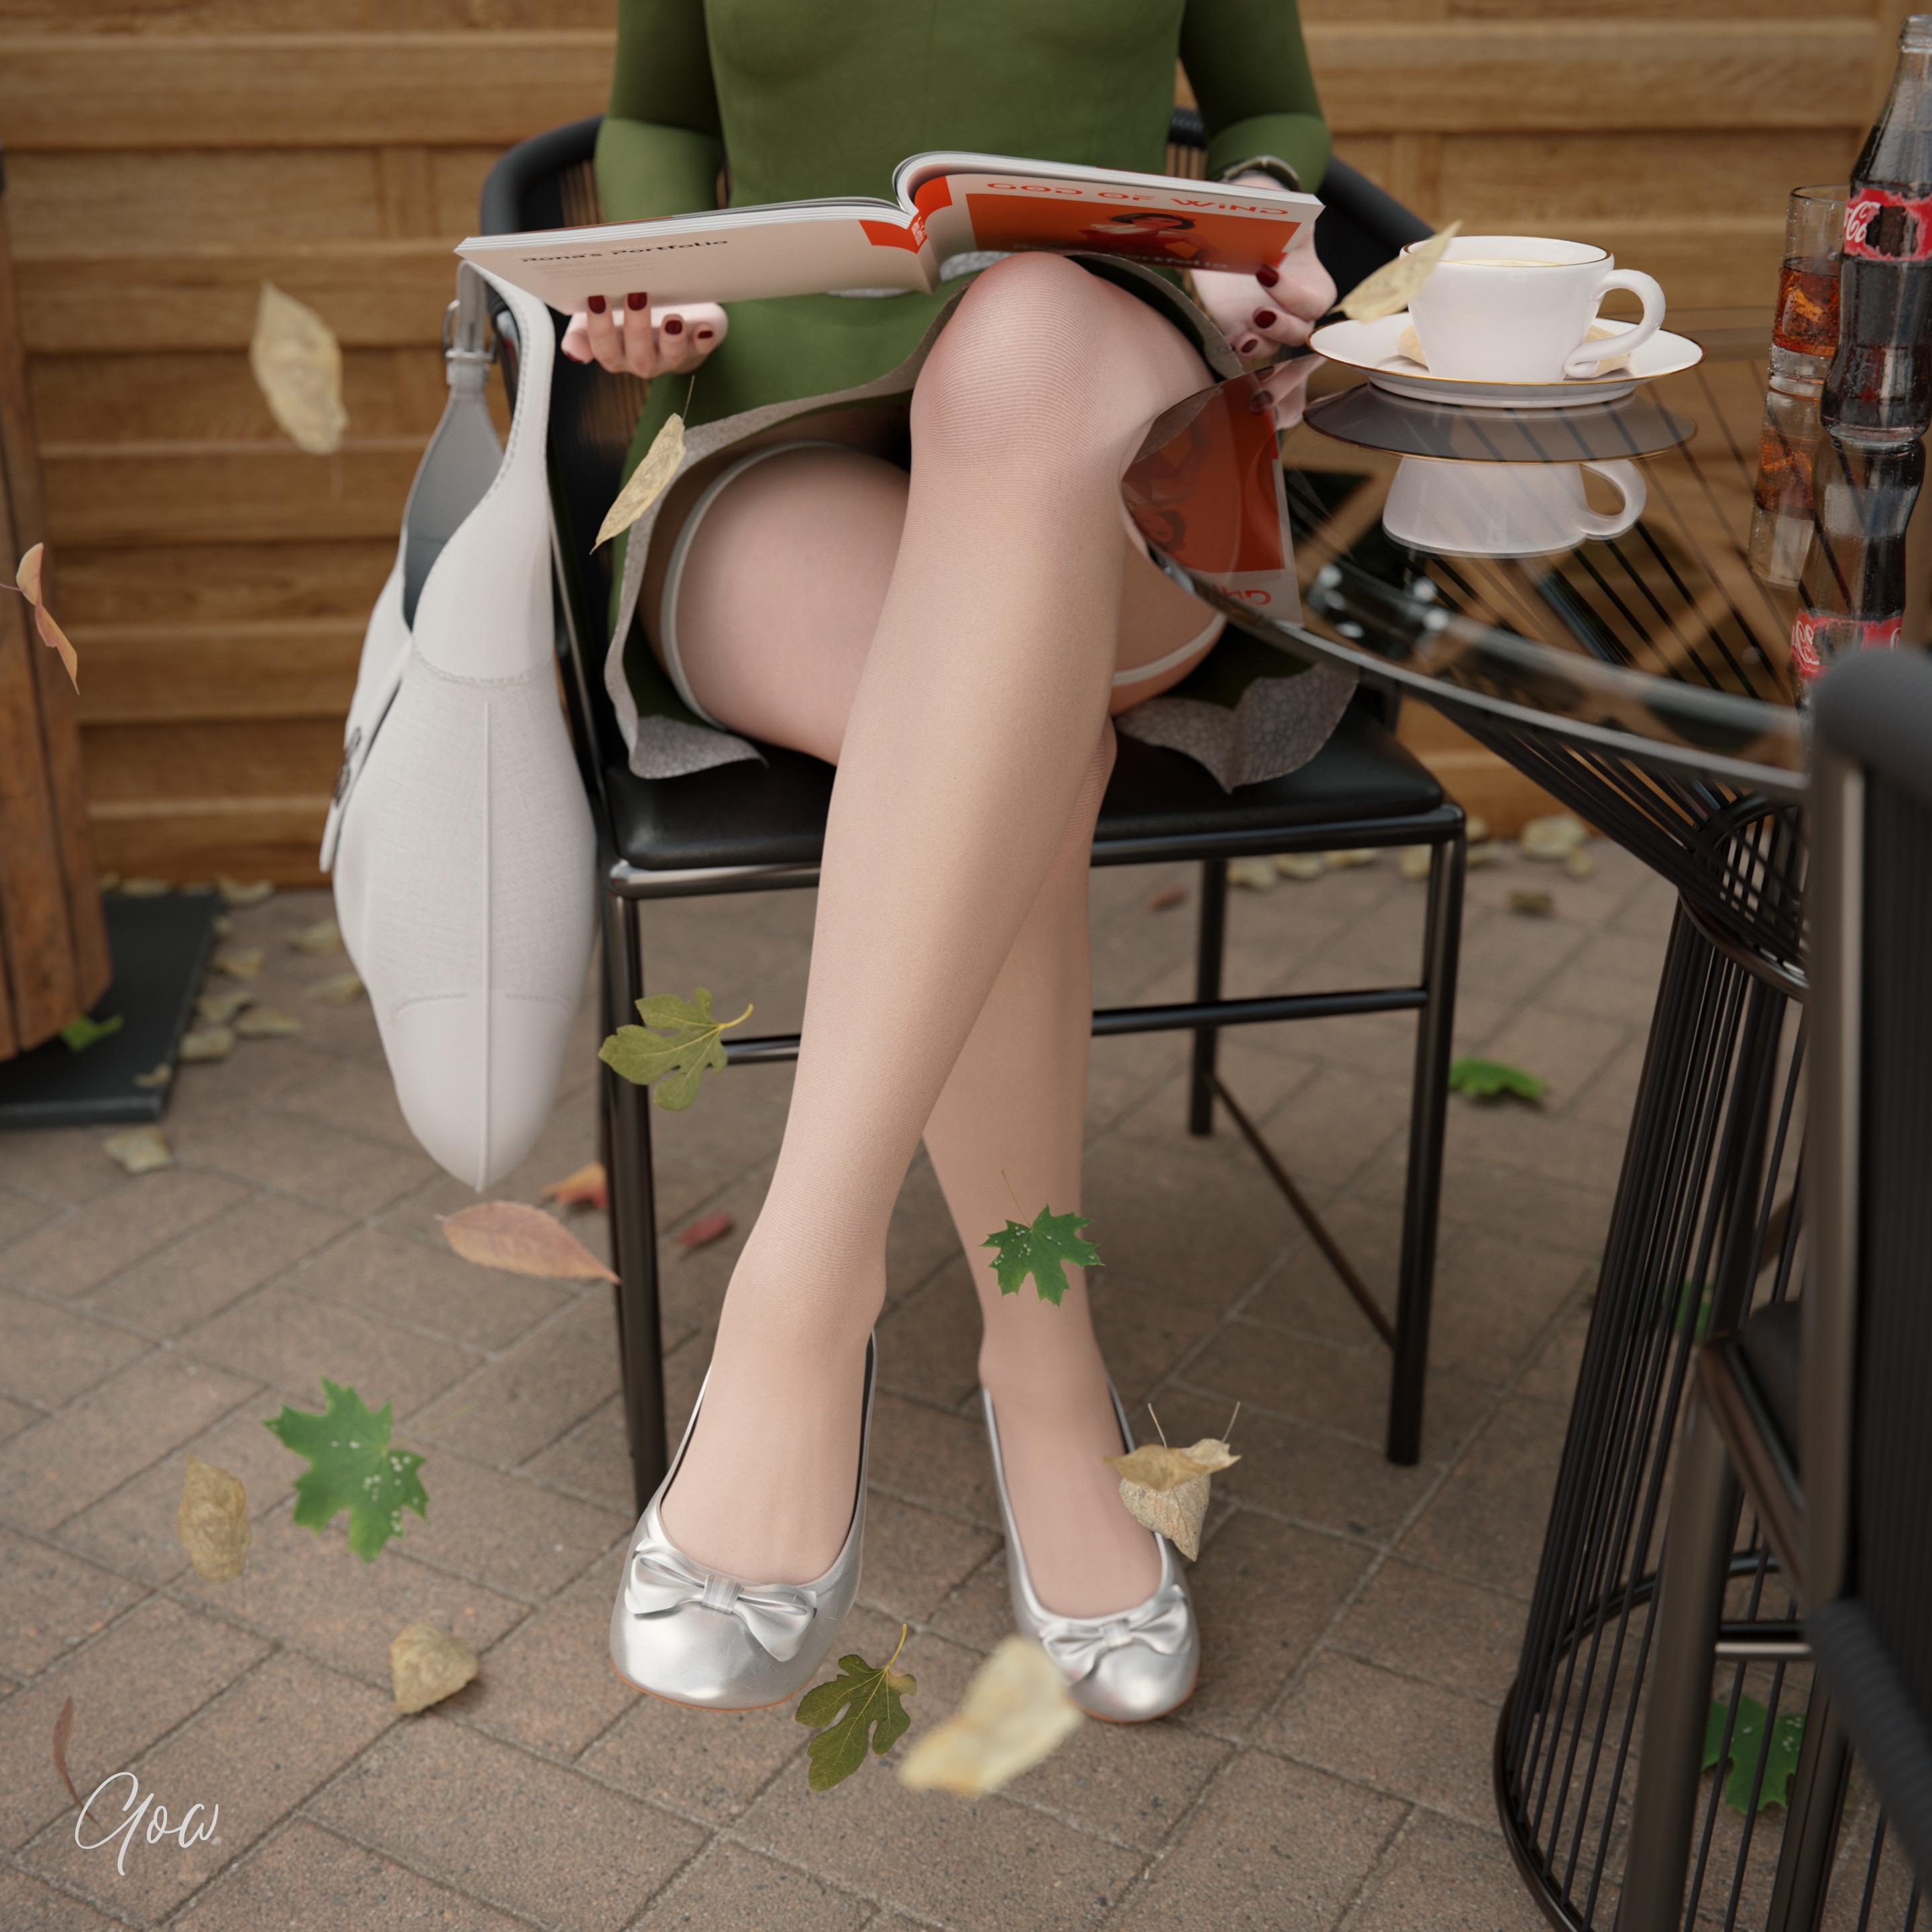 Rona in Greencaffe pt2 (Windy days) White Ballerina Cosplay Nylon Milf Clothed Upskirt Wet Pussy Story Legs Spread Legs Tease Photorealistic No Panties Dress Partially_clothed Outdoor Party Dress Lifted_skirt Skirt Original Character 2